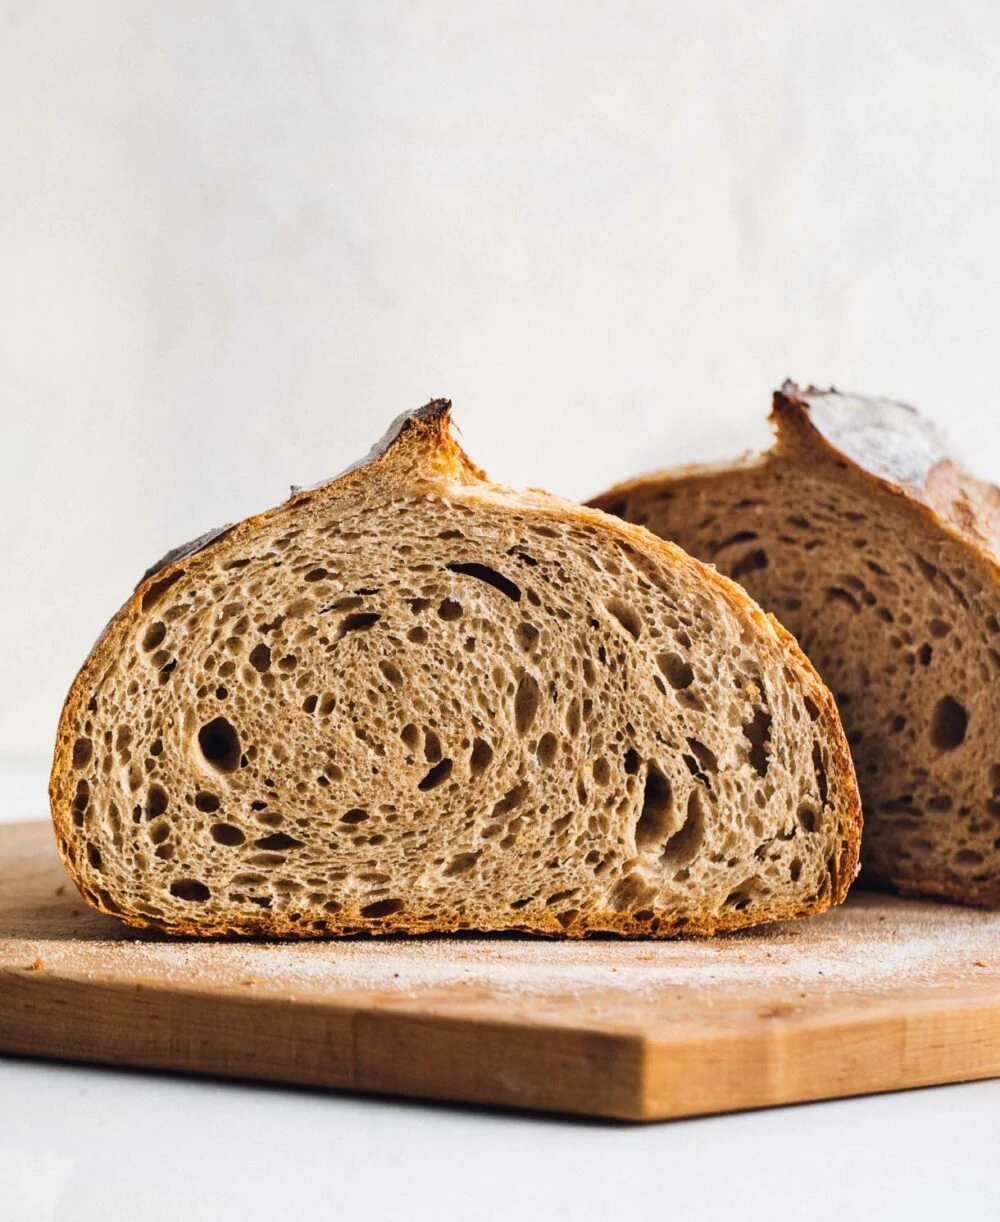 whole wheat sourdough bread, cut in half with crumb showing